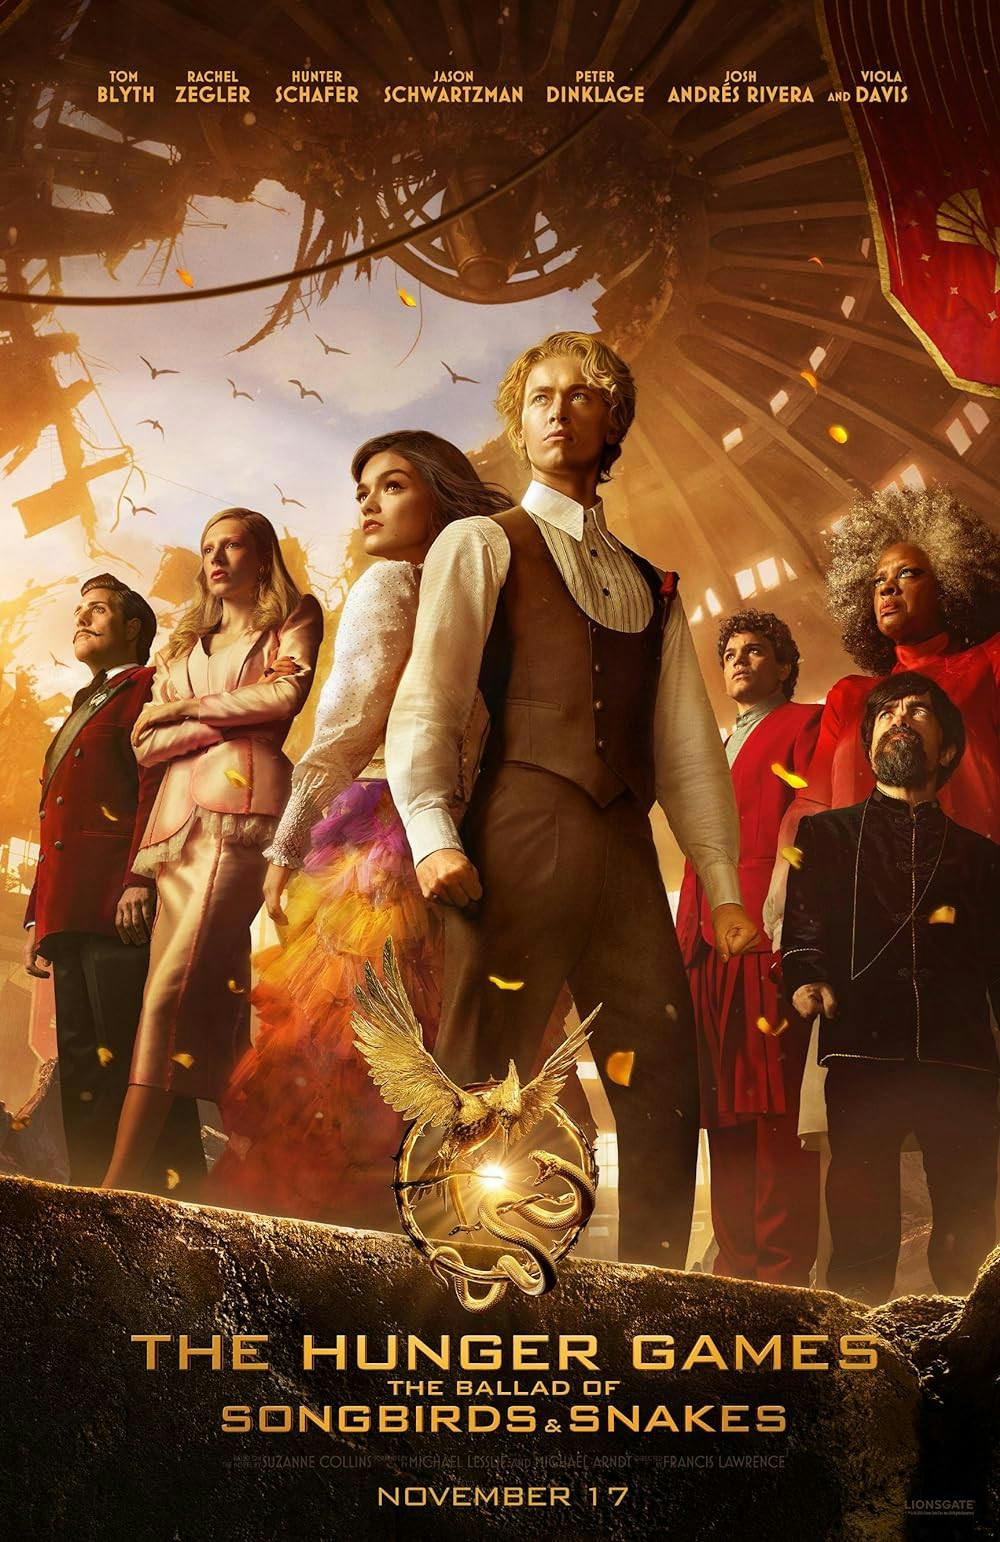 The Dark Secrets Behind the New Hunger Games Movie